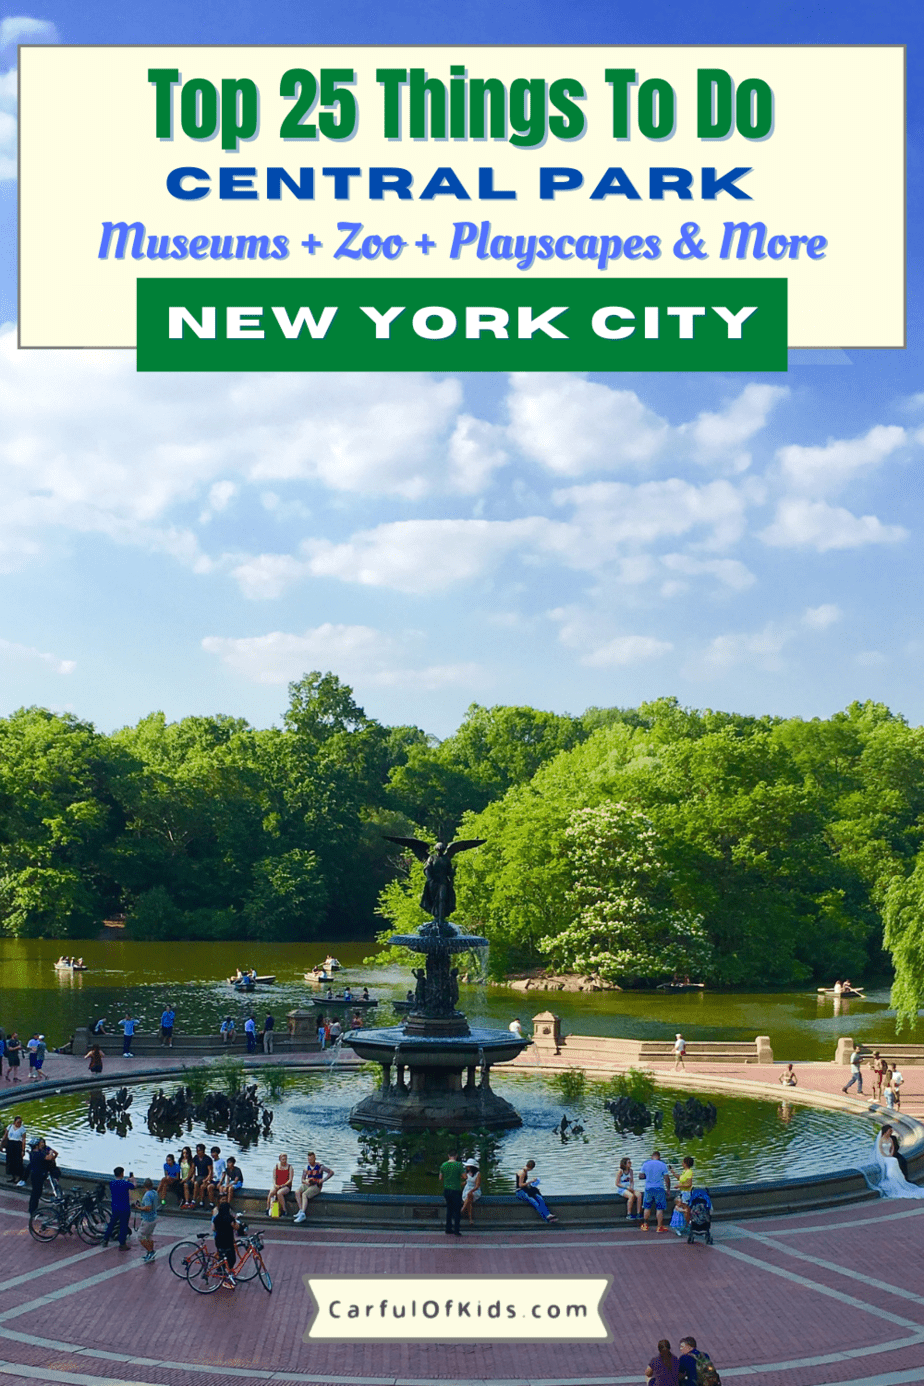 With over 800 acres, Central Park is a backyard for NYC locals as well as a top destination for visitors. . Find playscapes, lawn for picnicing, museums in or next to the park along with food carts and even a zoo.  Here's the top things to do in New York City's Central Park. Top Places to see in Central Park | Top Destinations in NYC | What to do with kids in NYC | Where to go in Central Park with Kids #CentralPark #NYC